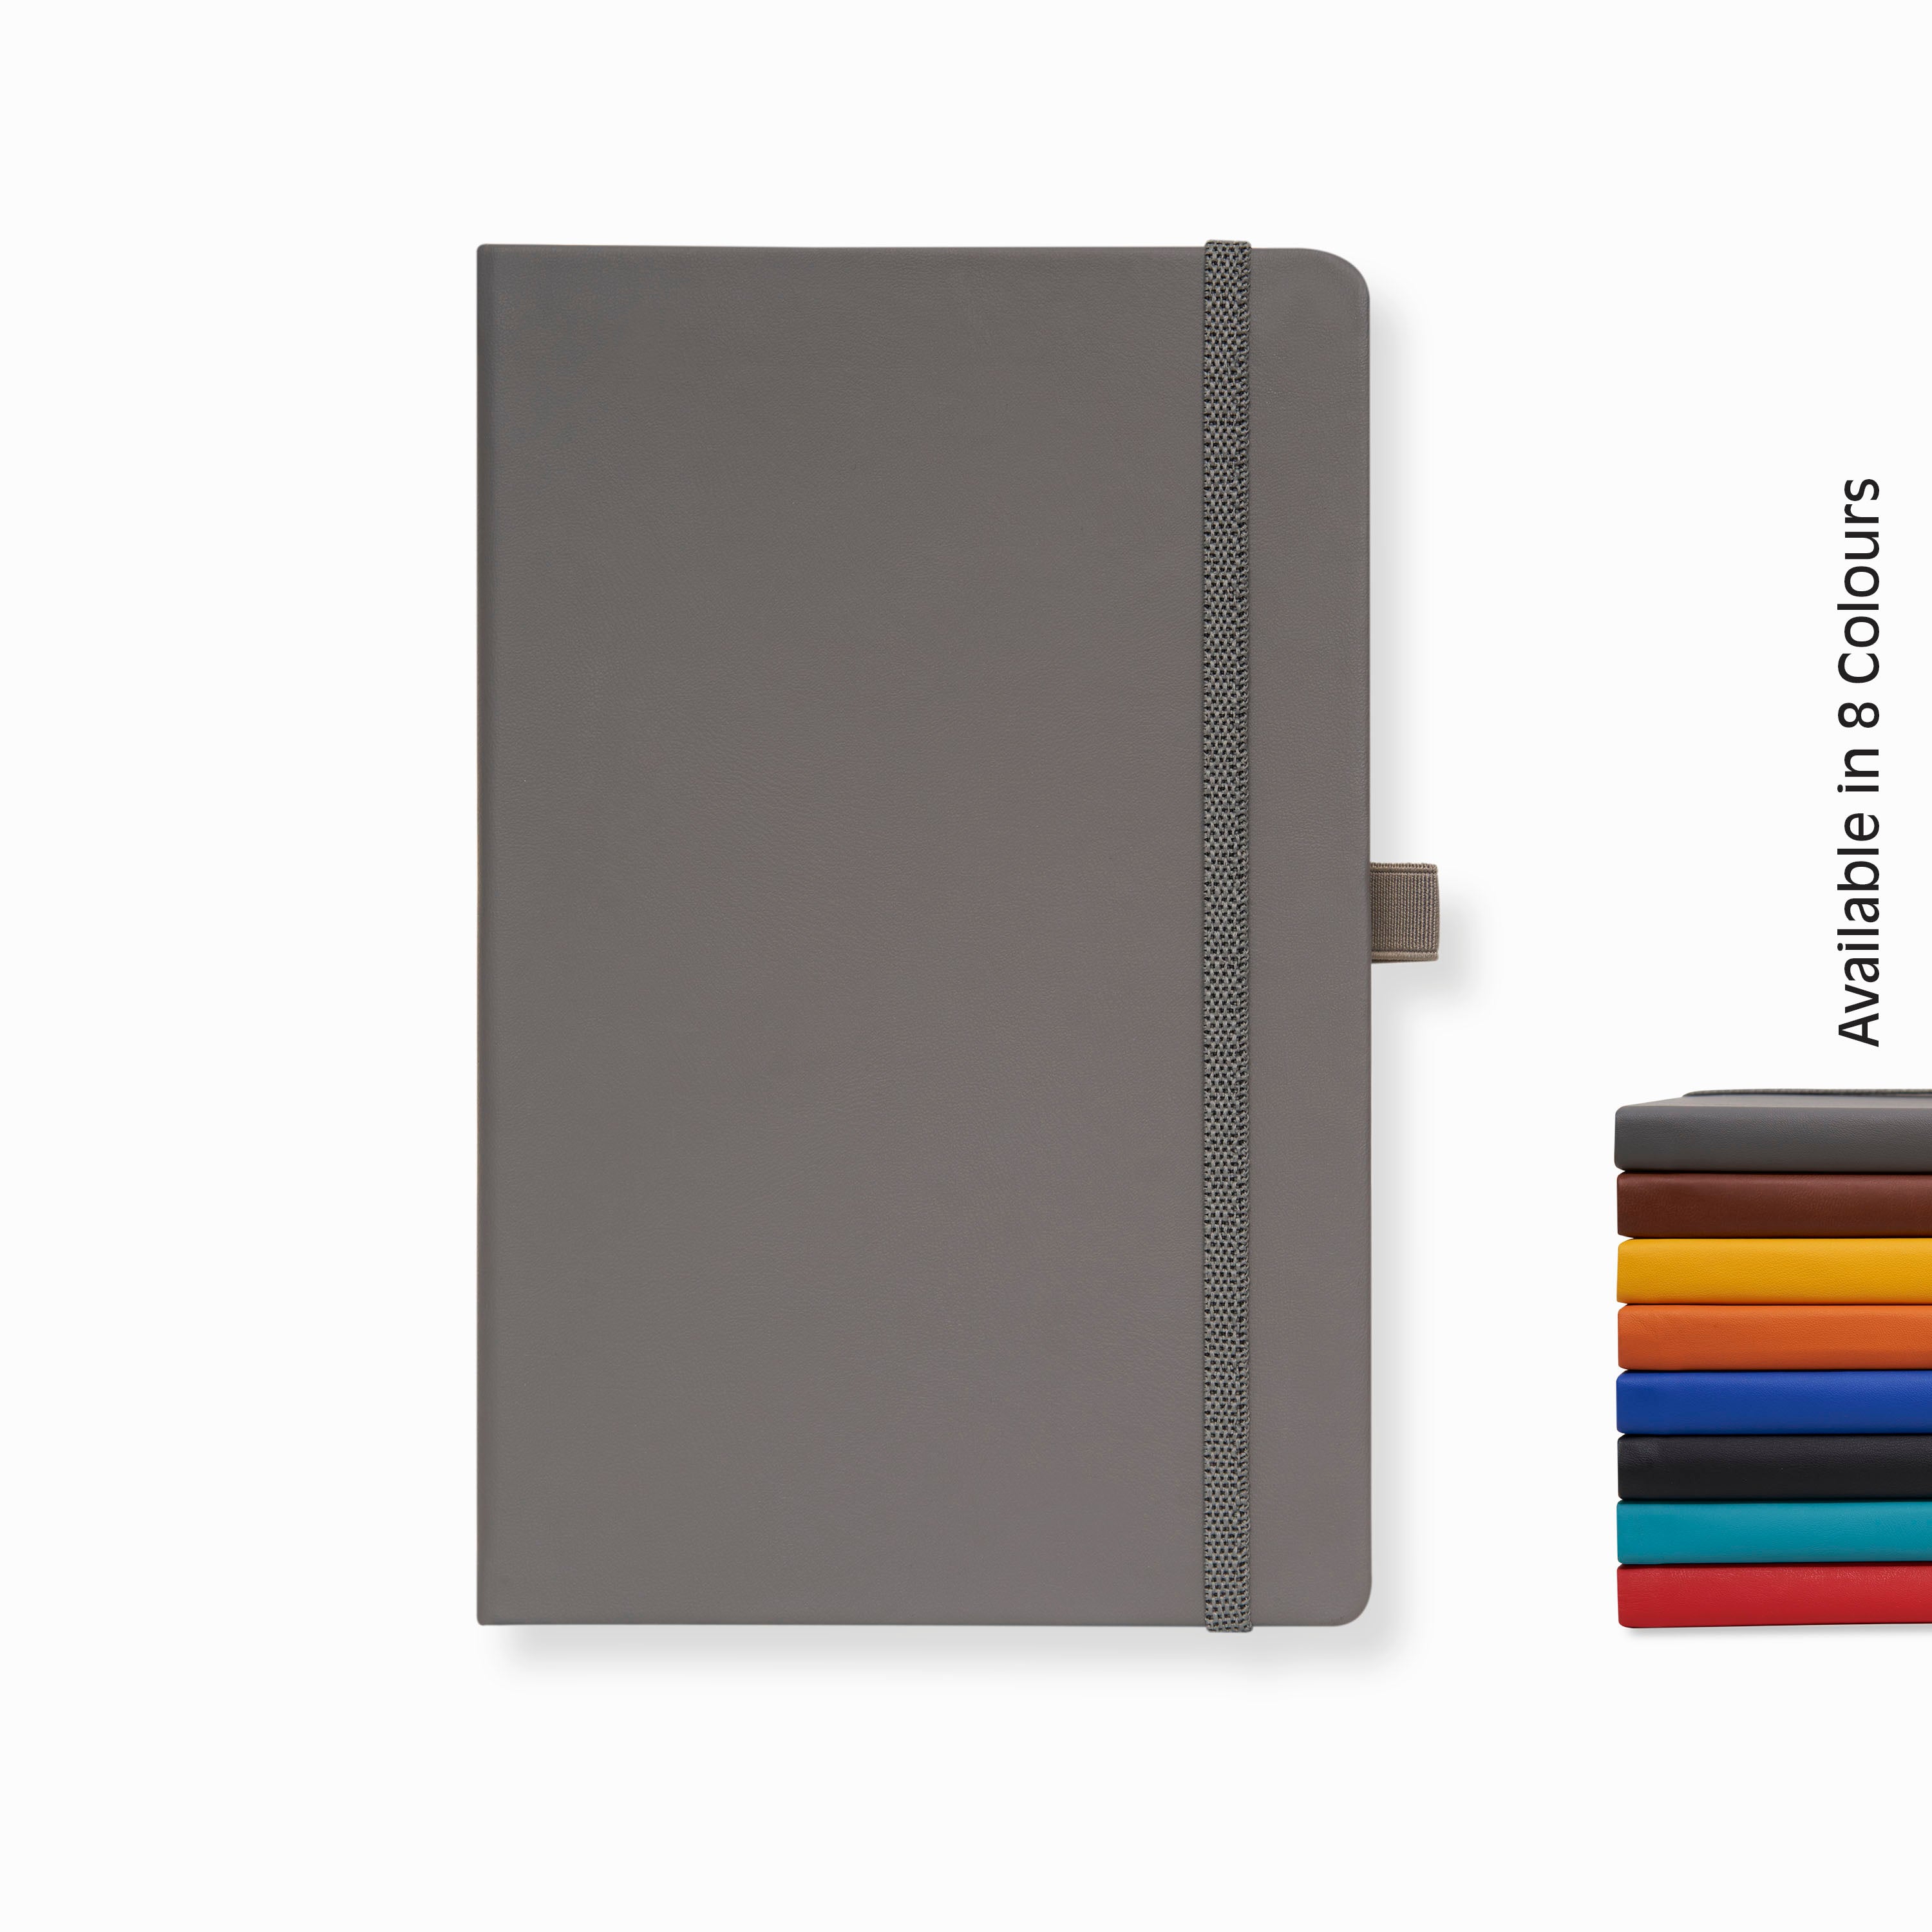 Pro Series Executive A5 PU Leather Hardbound Unruled Diary with Pen Loop - GREY